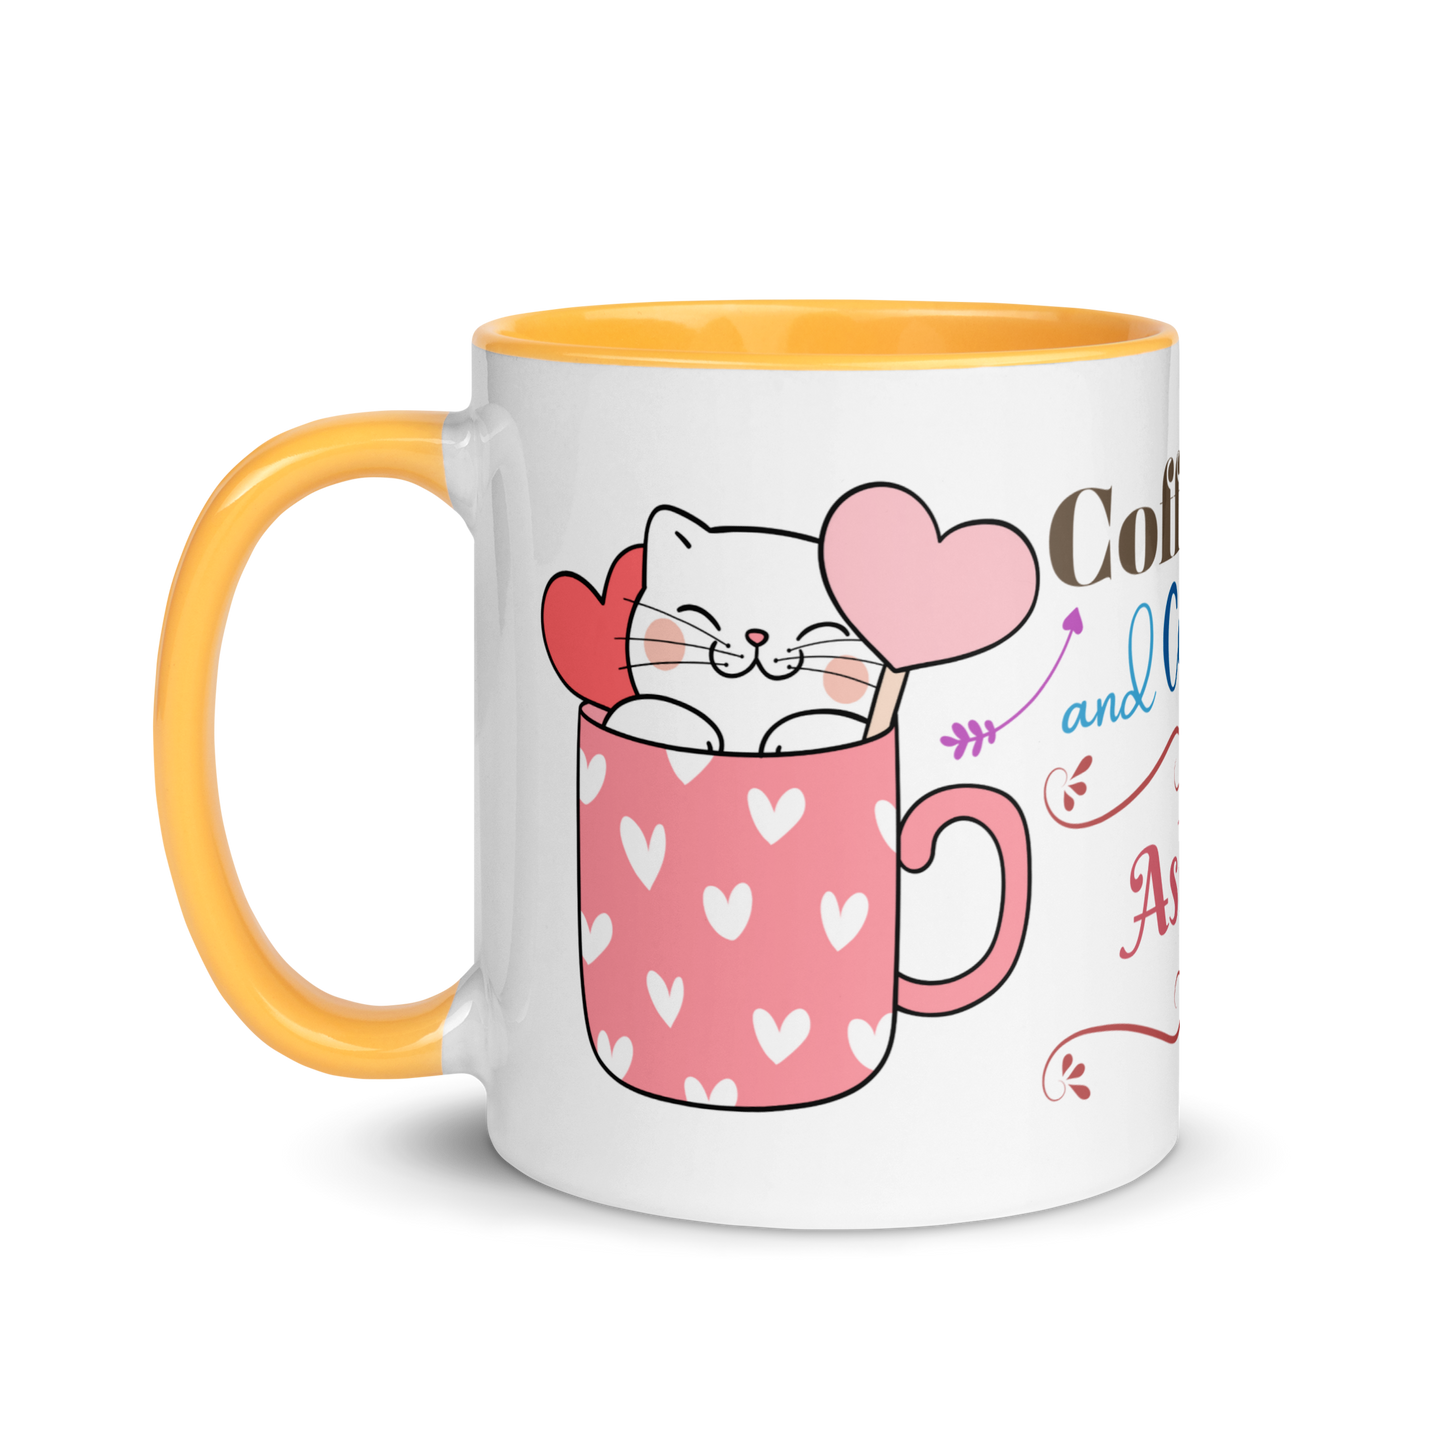 Personalized Coffee Mug 11oz | Adorable Coffee and Cats